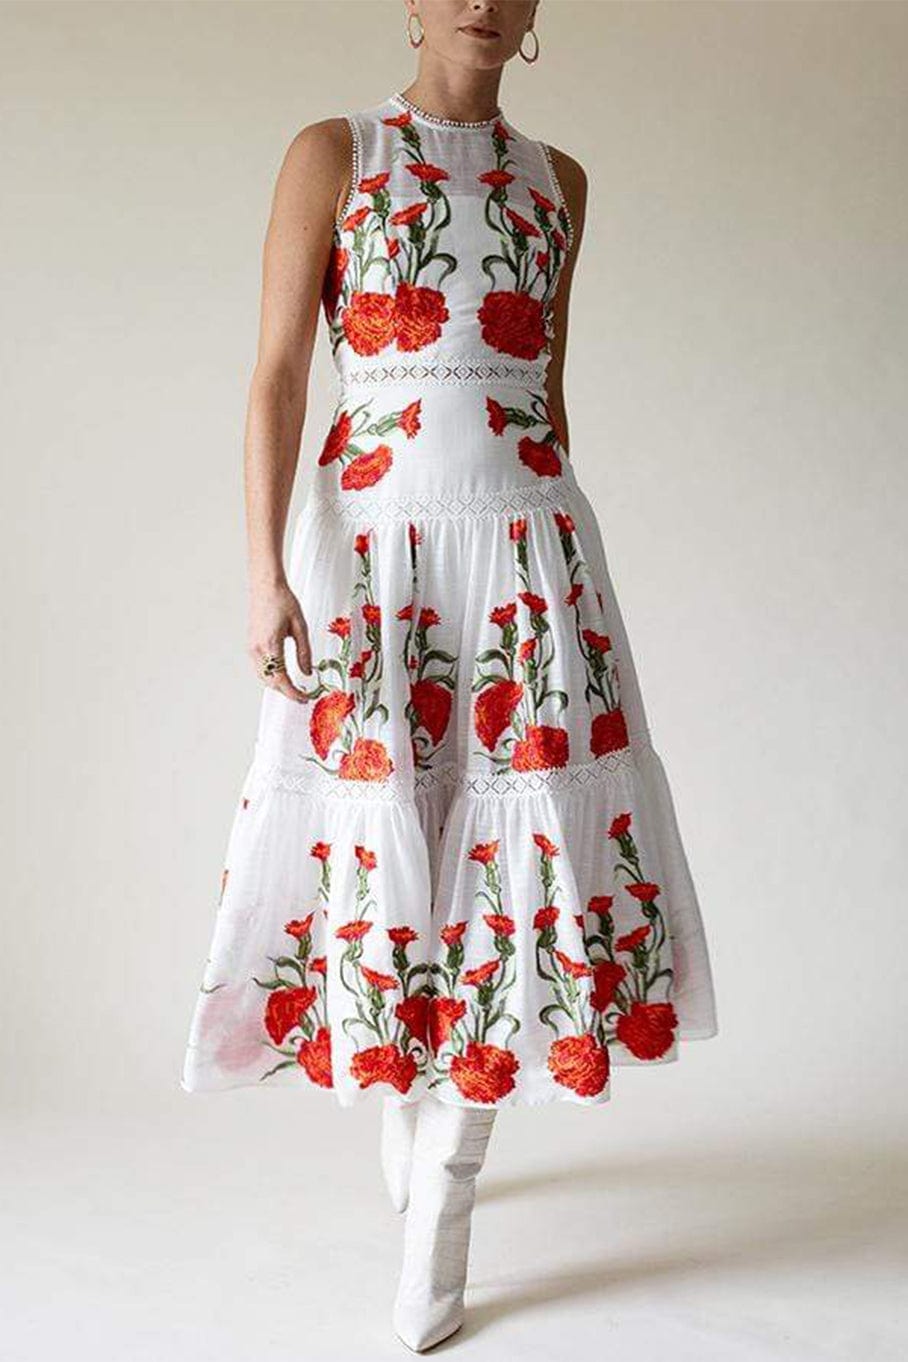 Blossom Embroidered Leomie Dress CLOTHINGDRESSCASUAL ALEXIS   